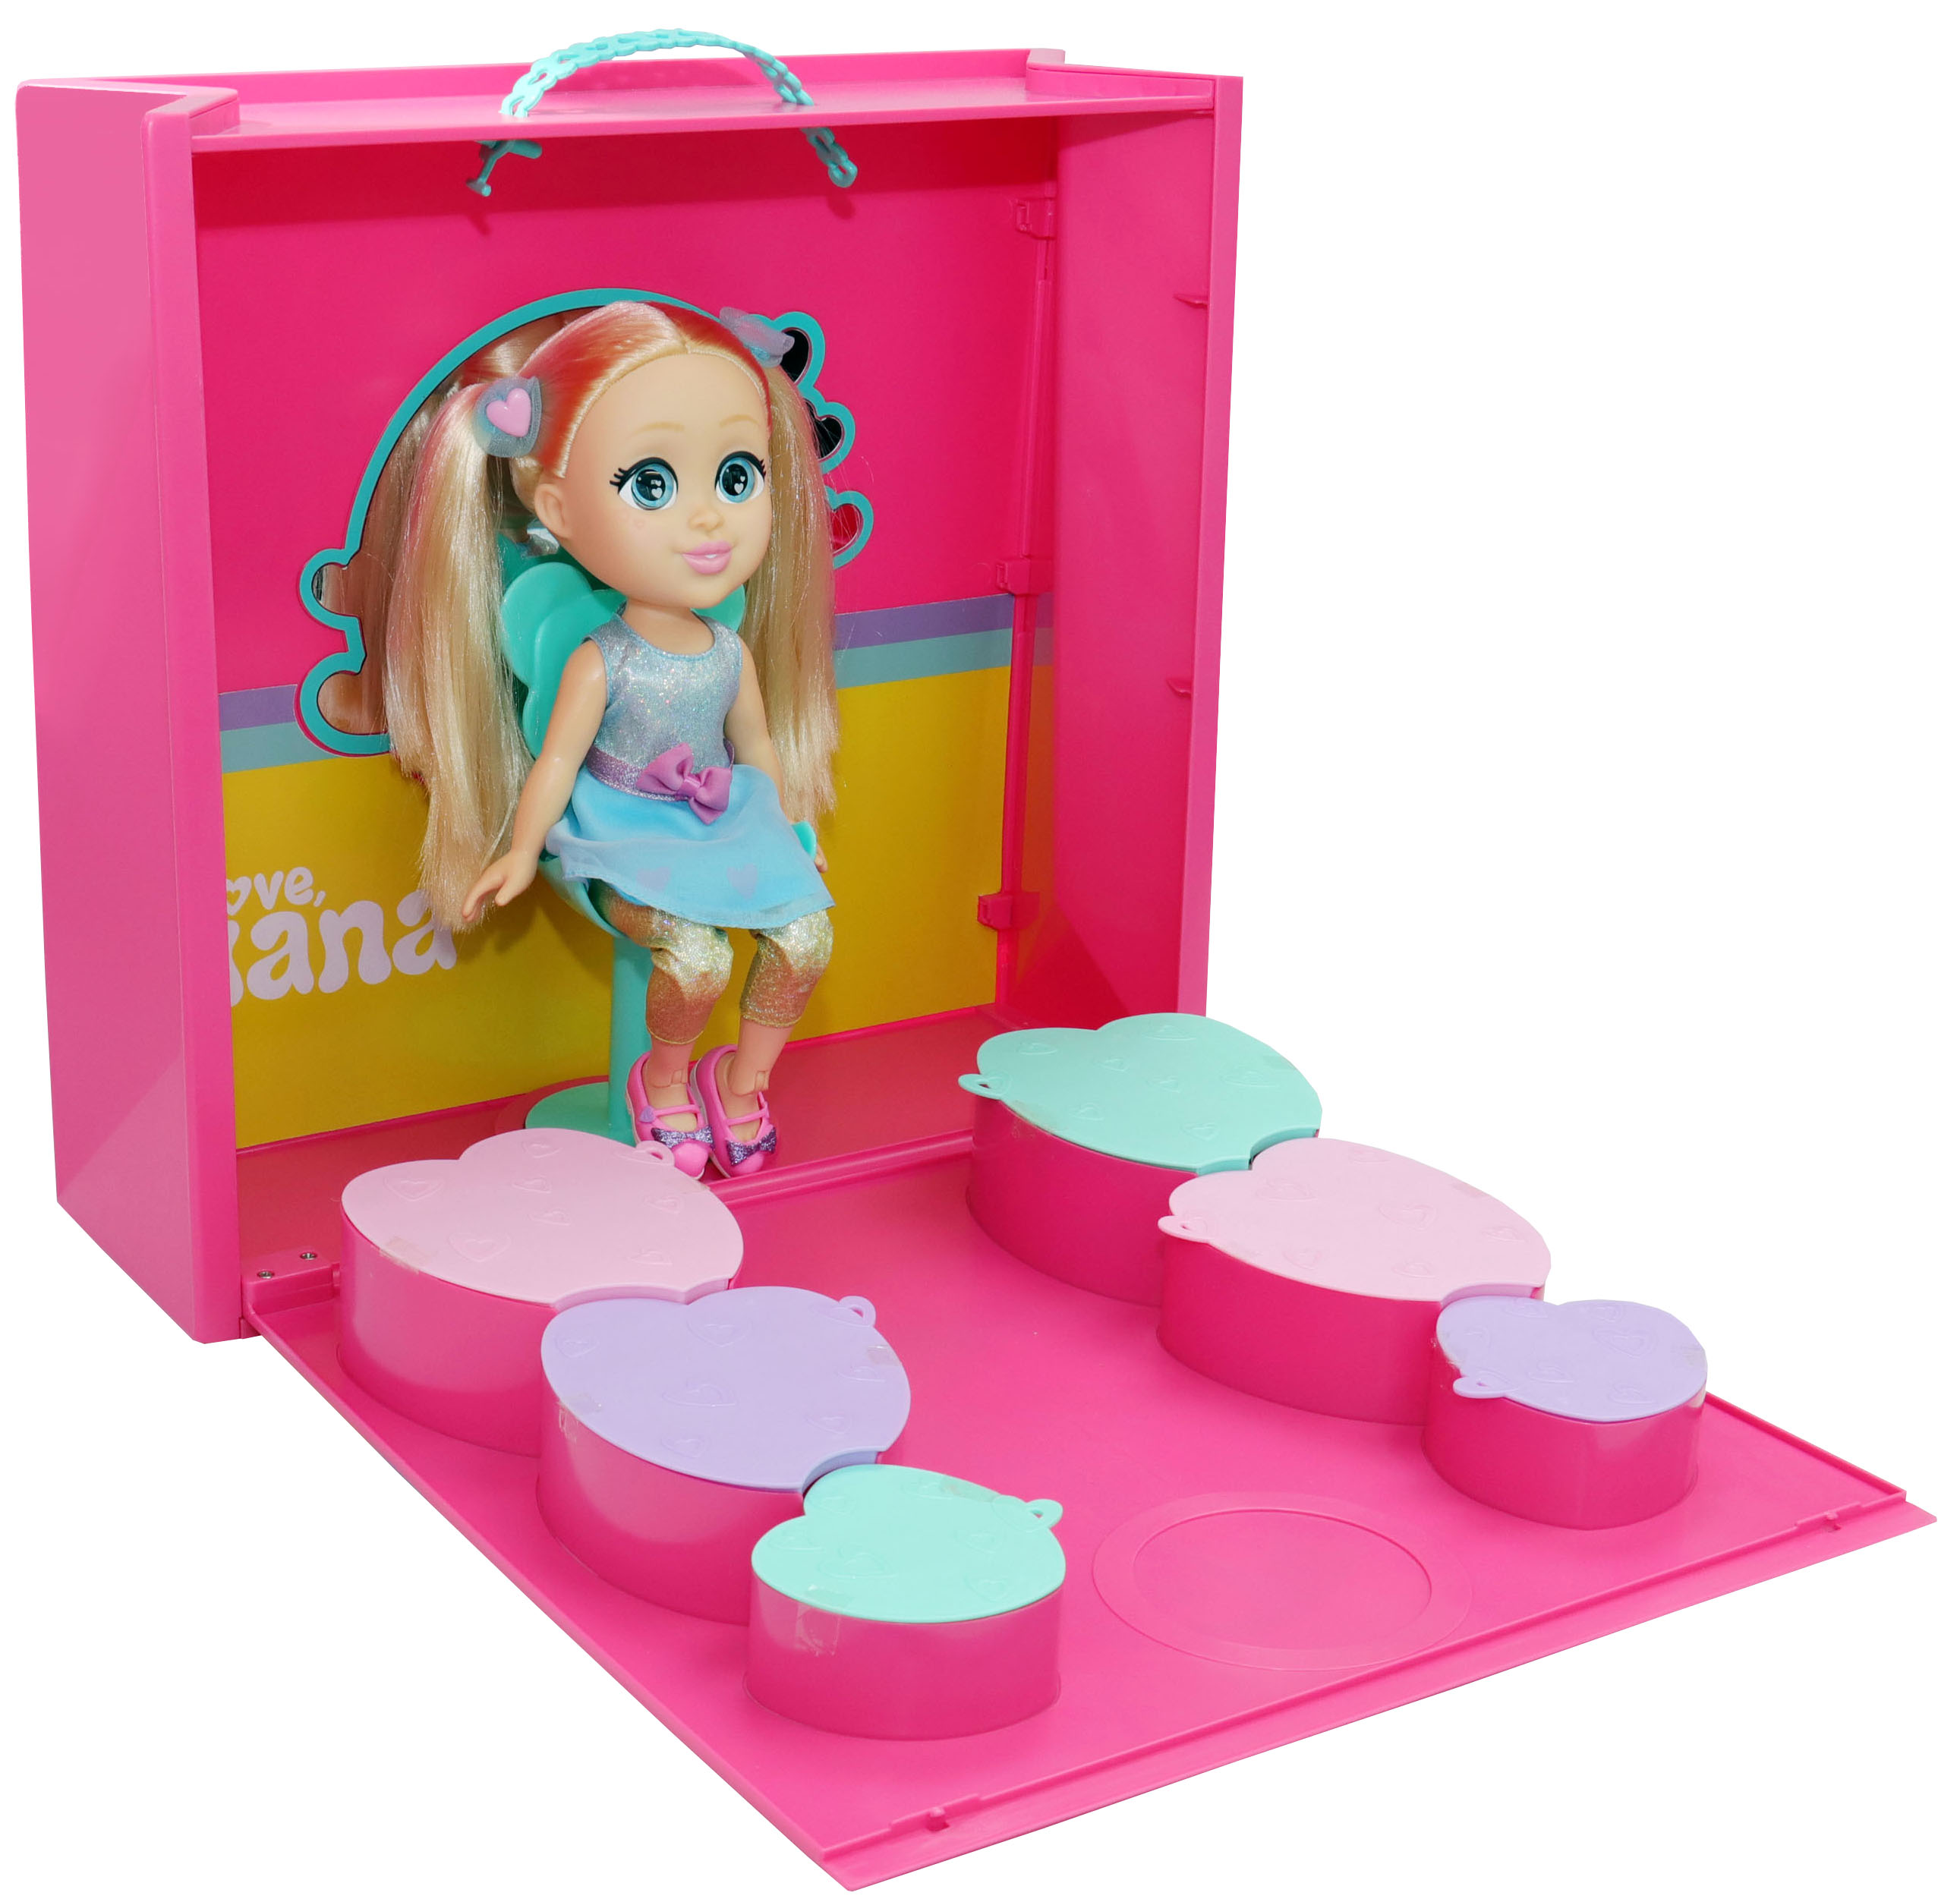 Love Diana Mystery Shopper Playset With 13 inch Doll Plus 12 Surprises, For Ages 3+ - image 5 of 14